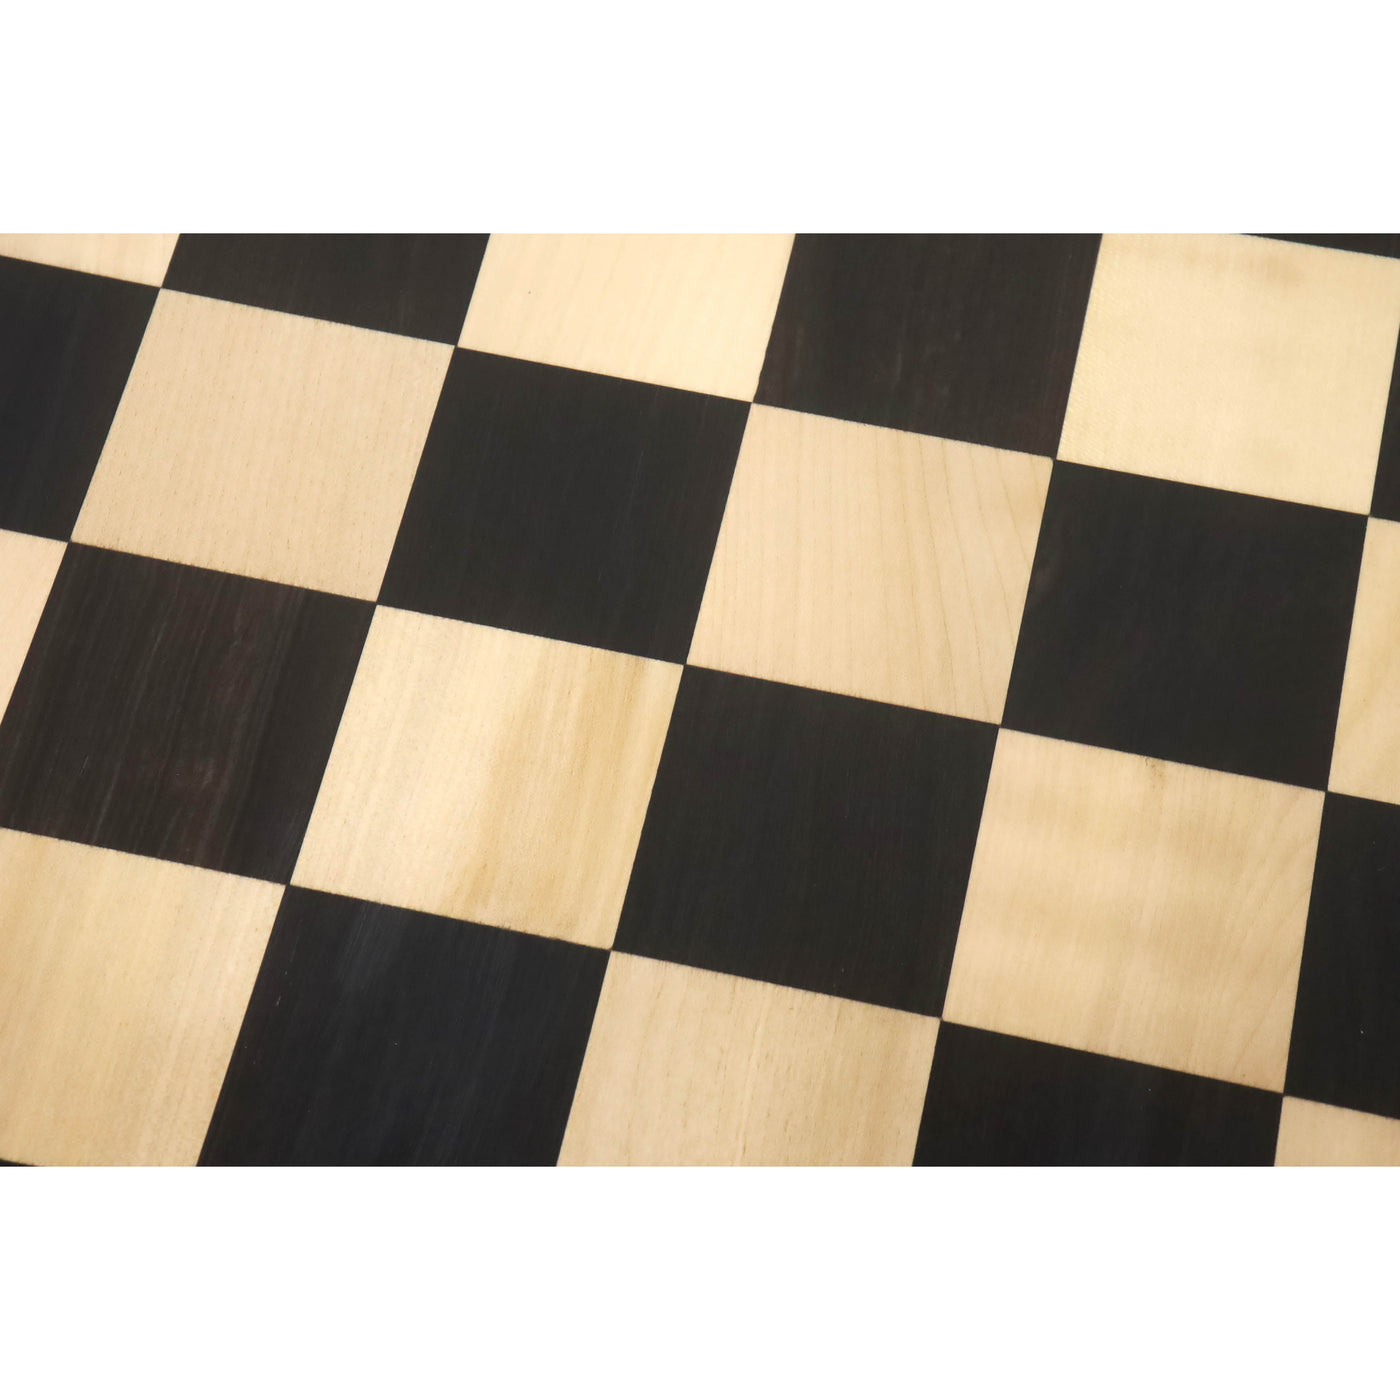 Combo of 3.9" Professional Staunton Chess Set - Pieces in Ebony Wood with Board and Box